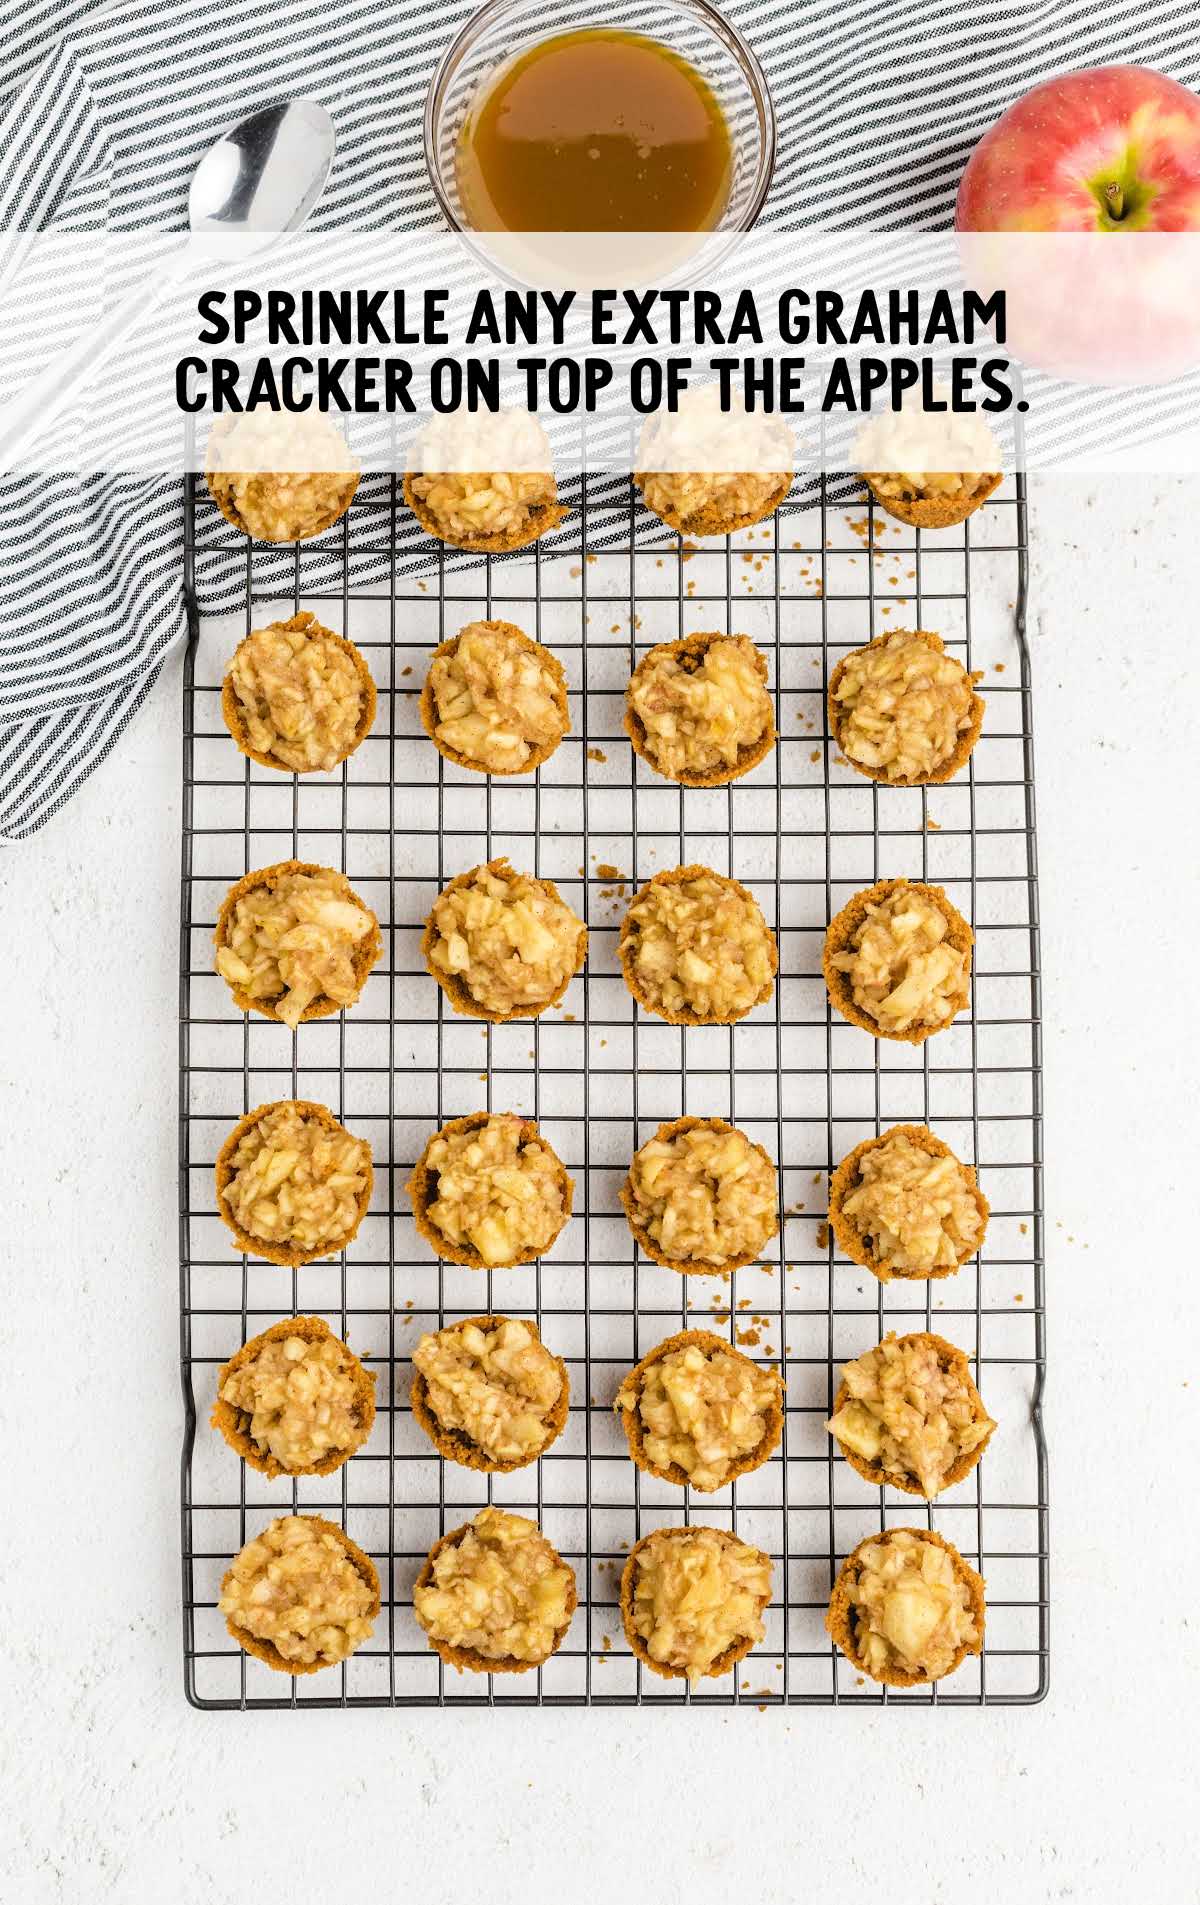 graham crackers crumbled on top of the apple mixture